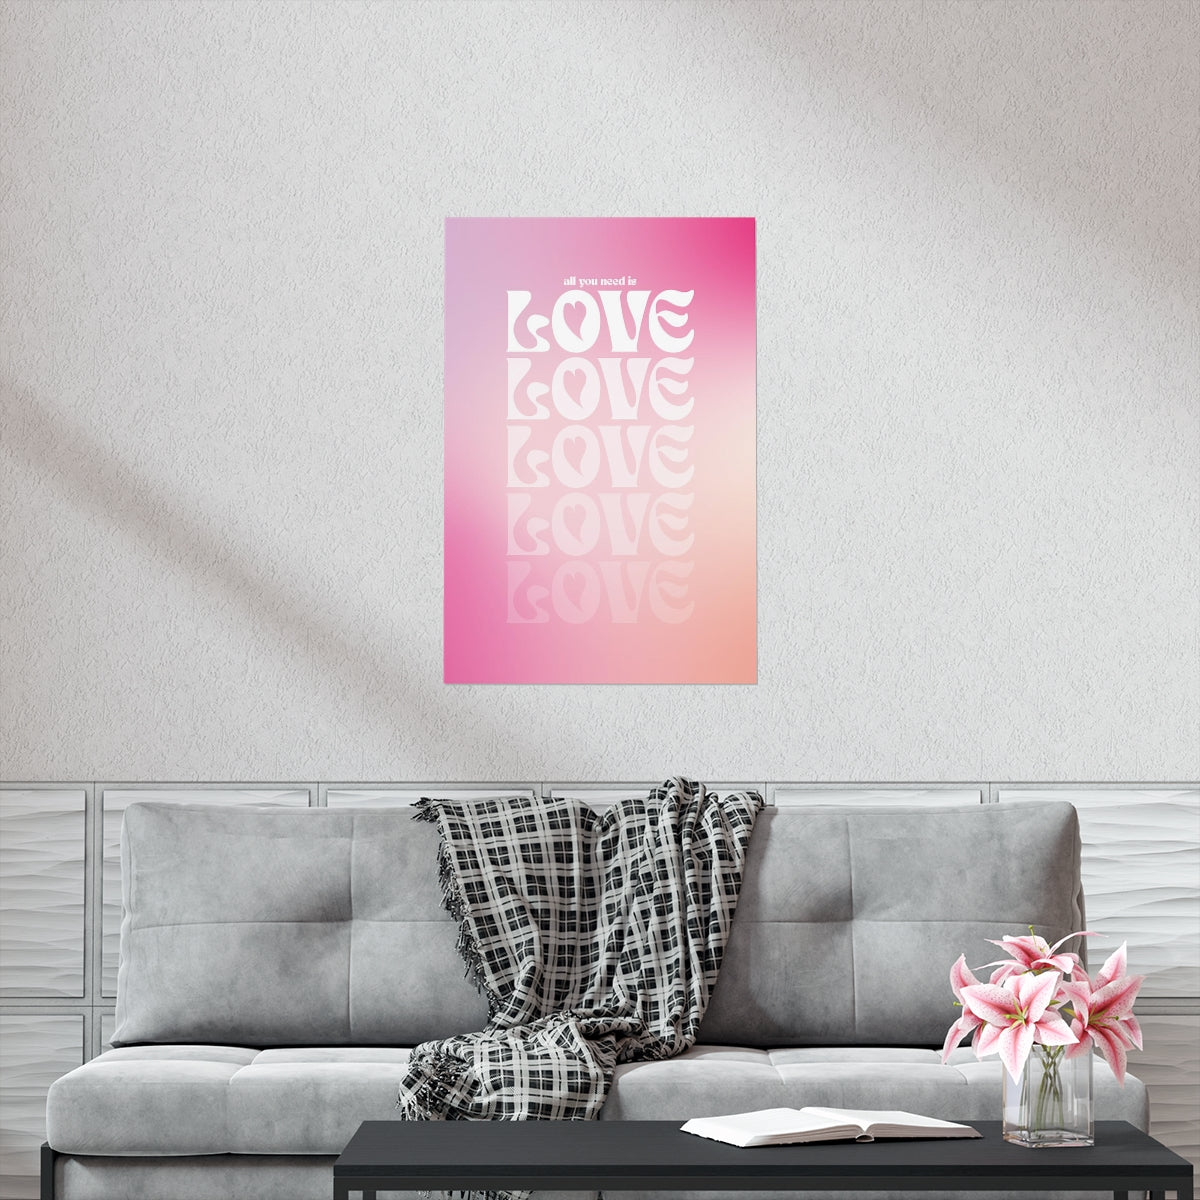 All You Need Is Love Wall Art Print